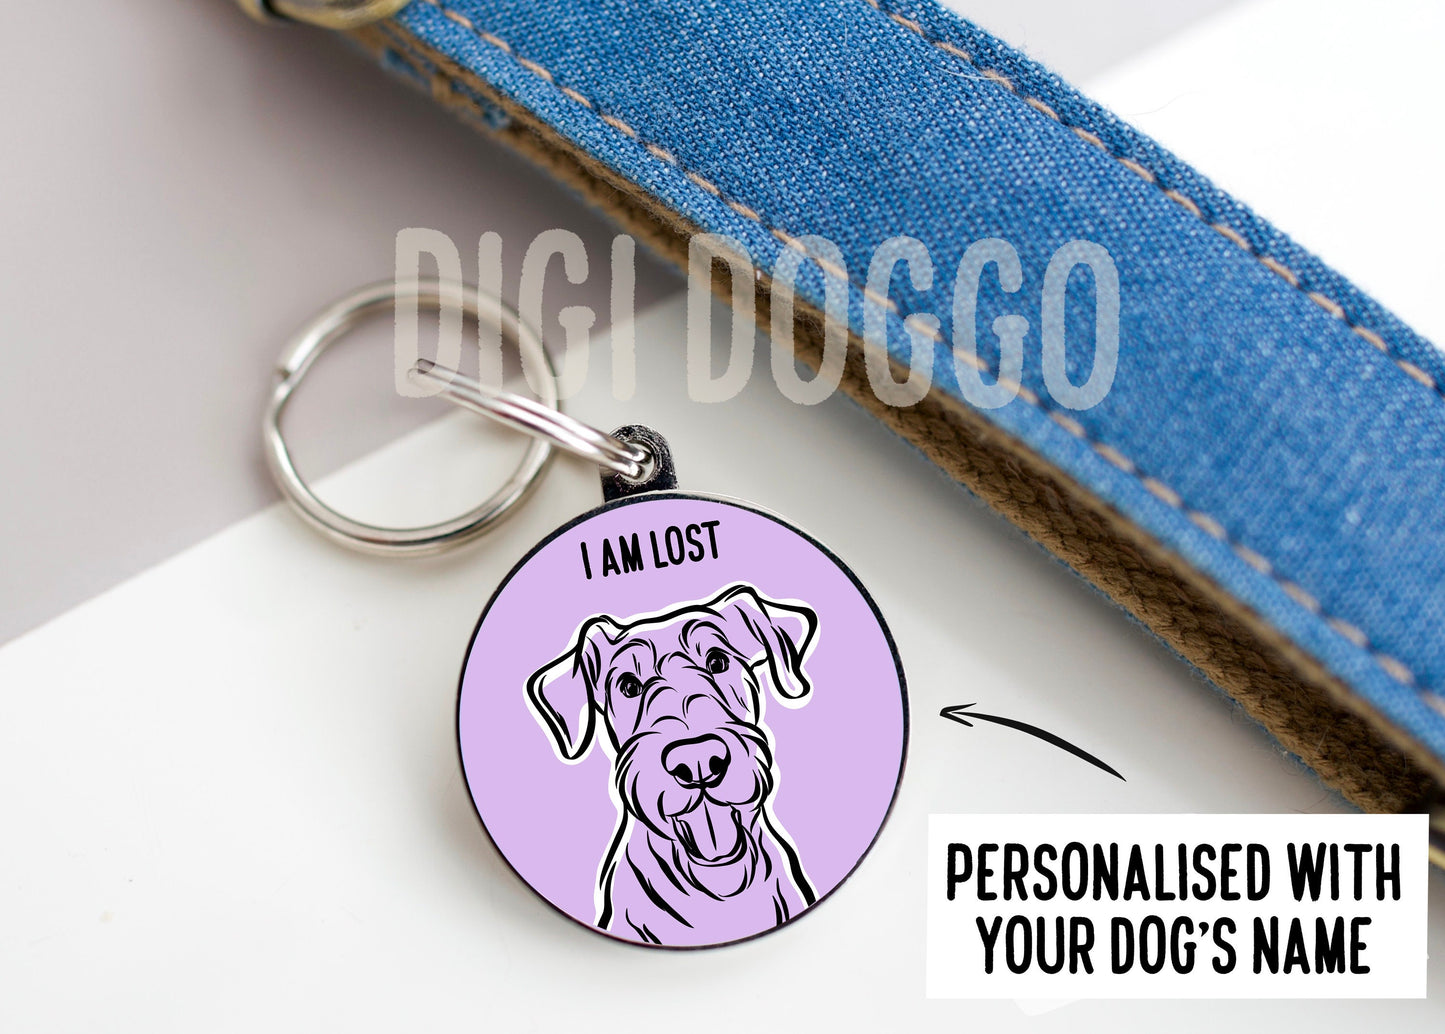 Airedale Terrier Outline ID Tag/ Minimalist Airedale Terrier ID Charm/ Personalised Circle ID Dog Tag/ Airedale Terrier Owner Cute Gift